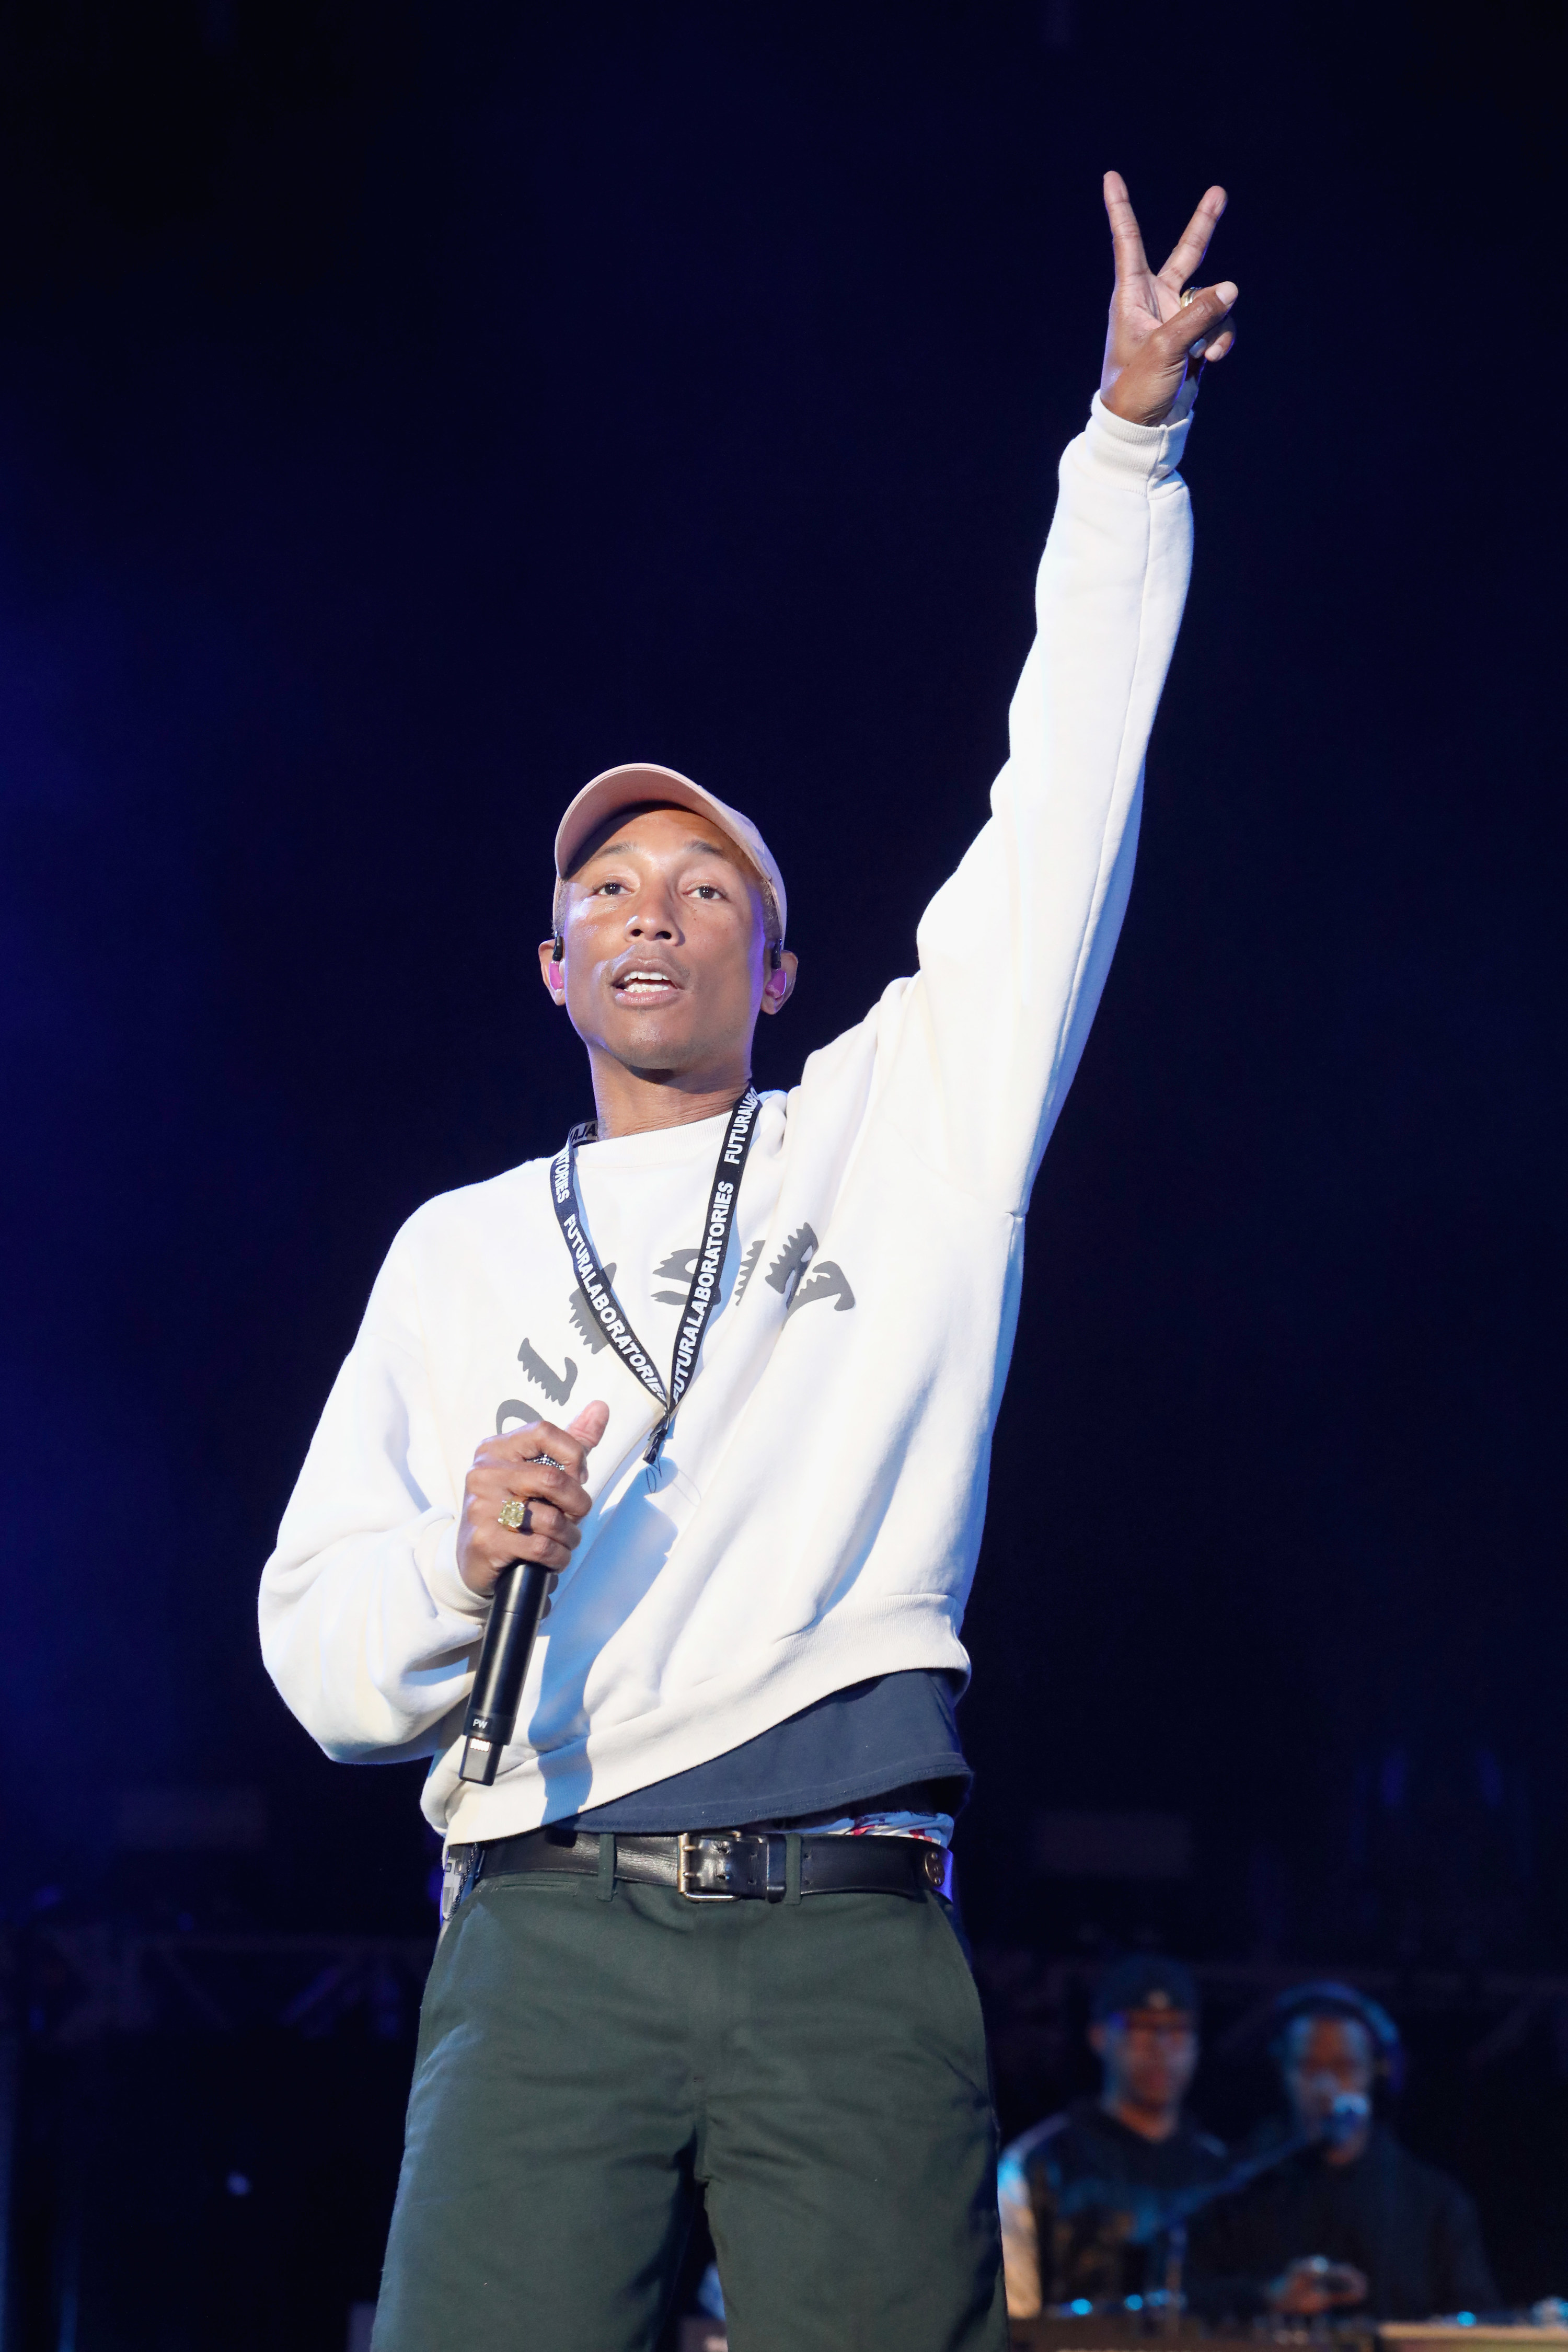 Pharrell standing with one arm raised and holding a microphone in the other